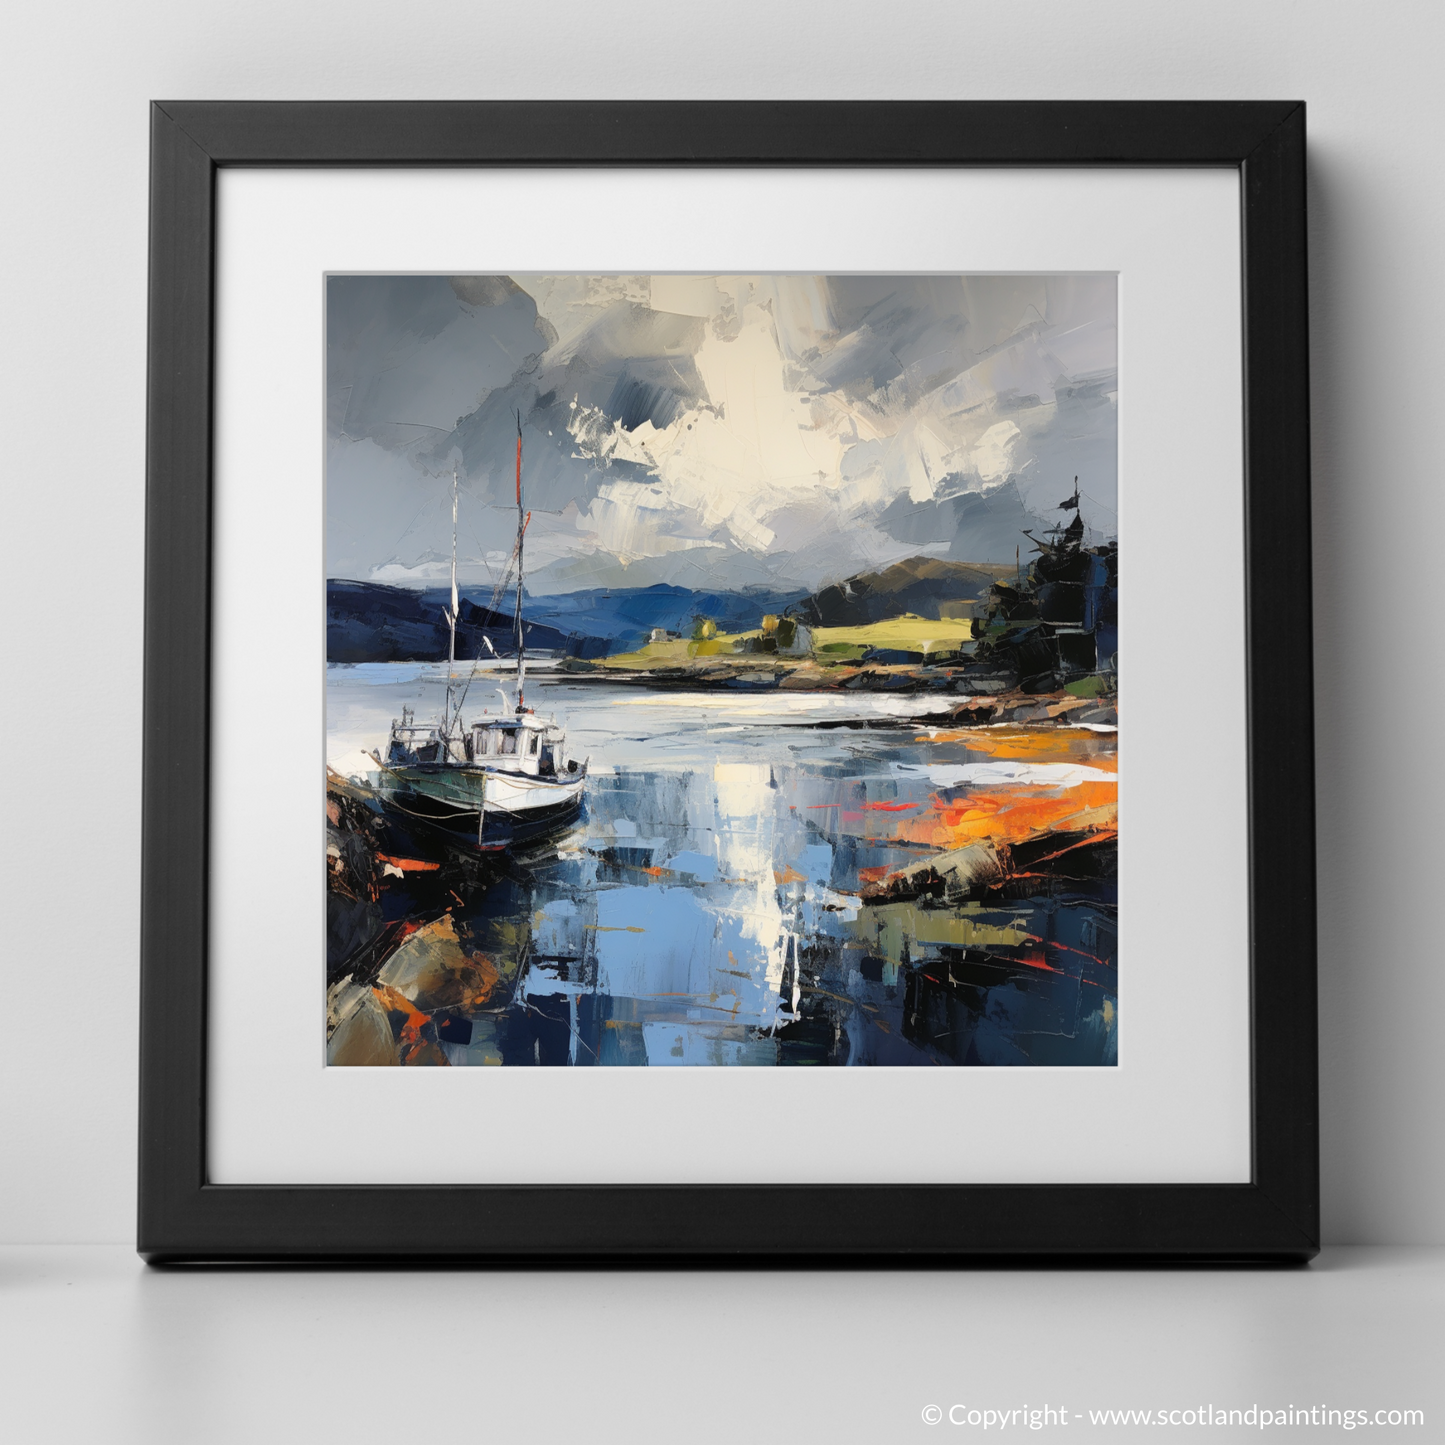 Art Print of Tayvallich Harbour with a stormy sky with a black frame